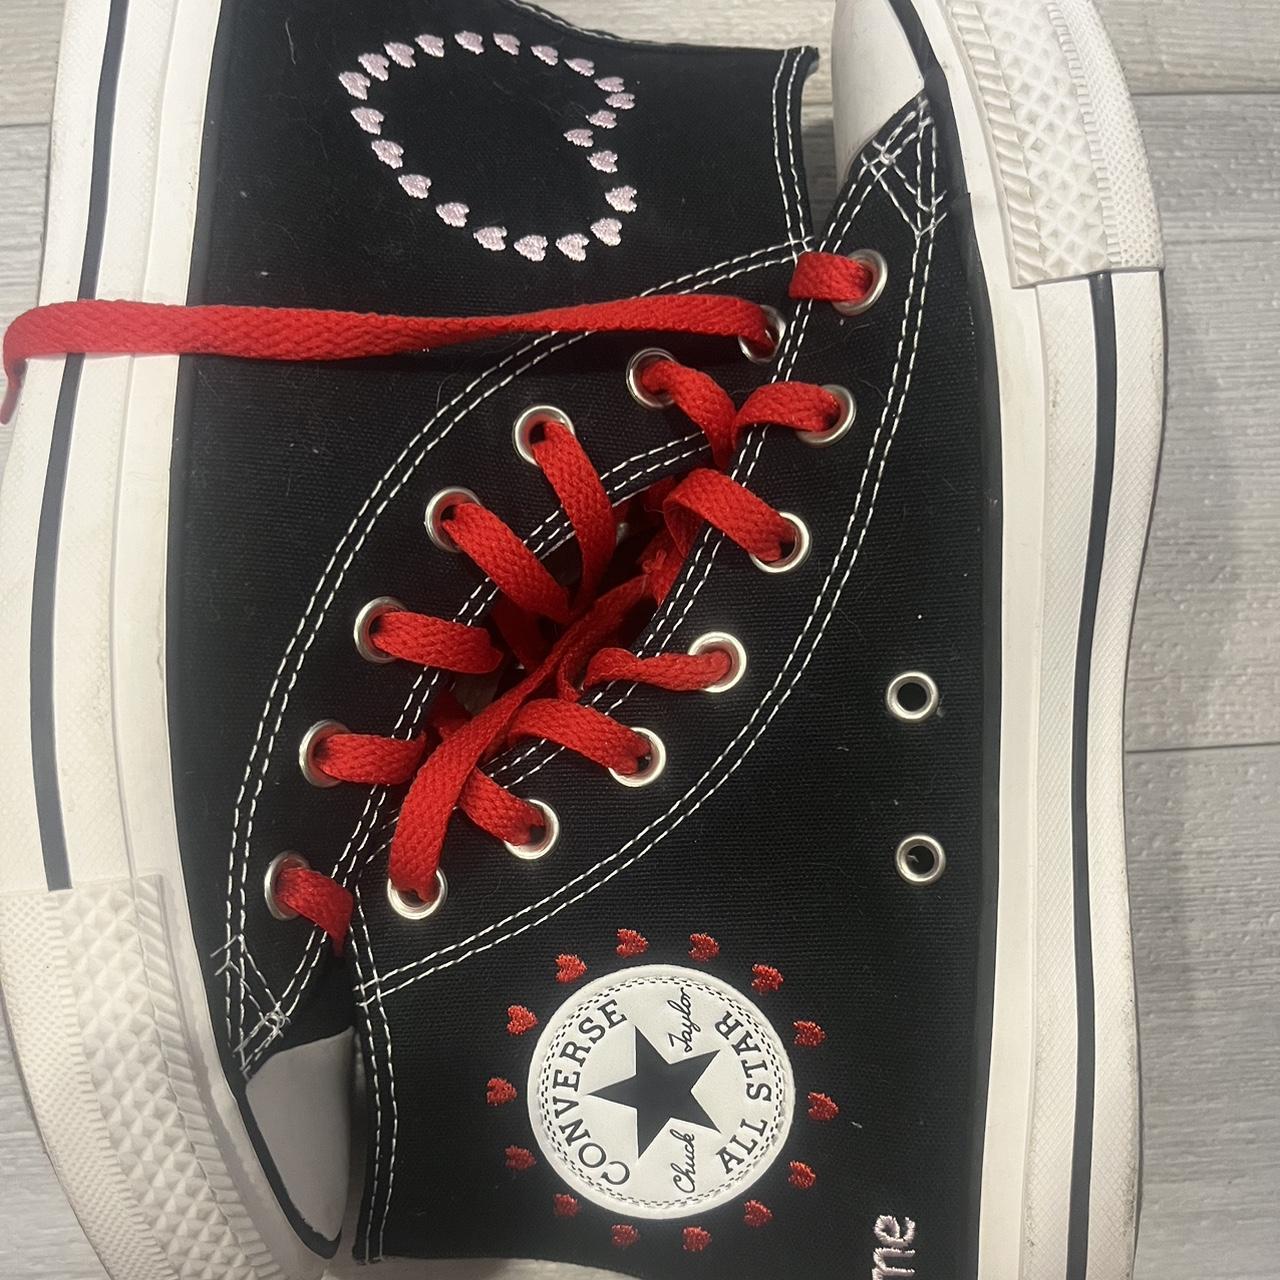 Converse Women's Black and Red Trainers | Depop